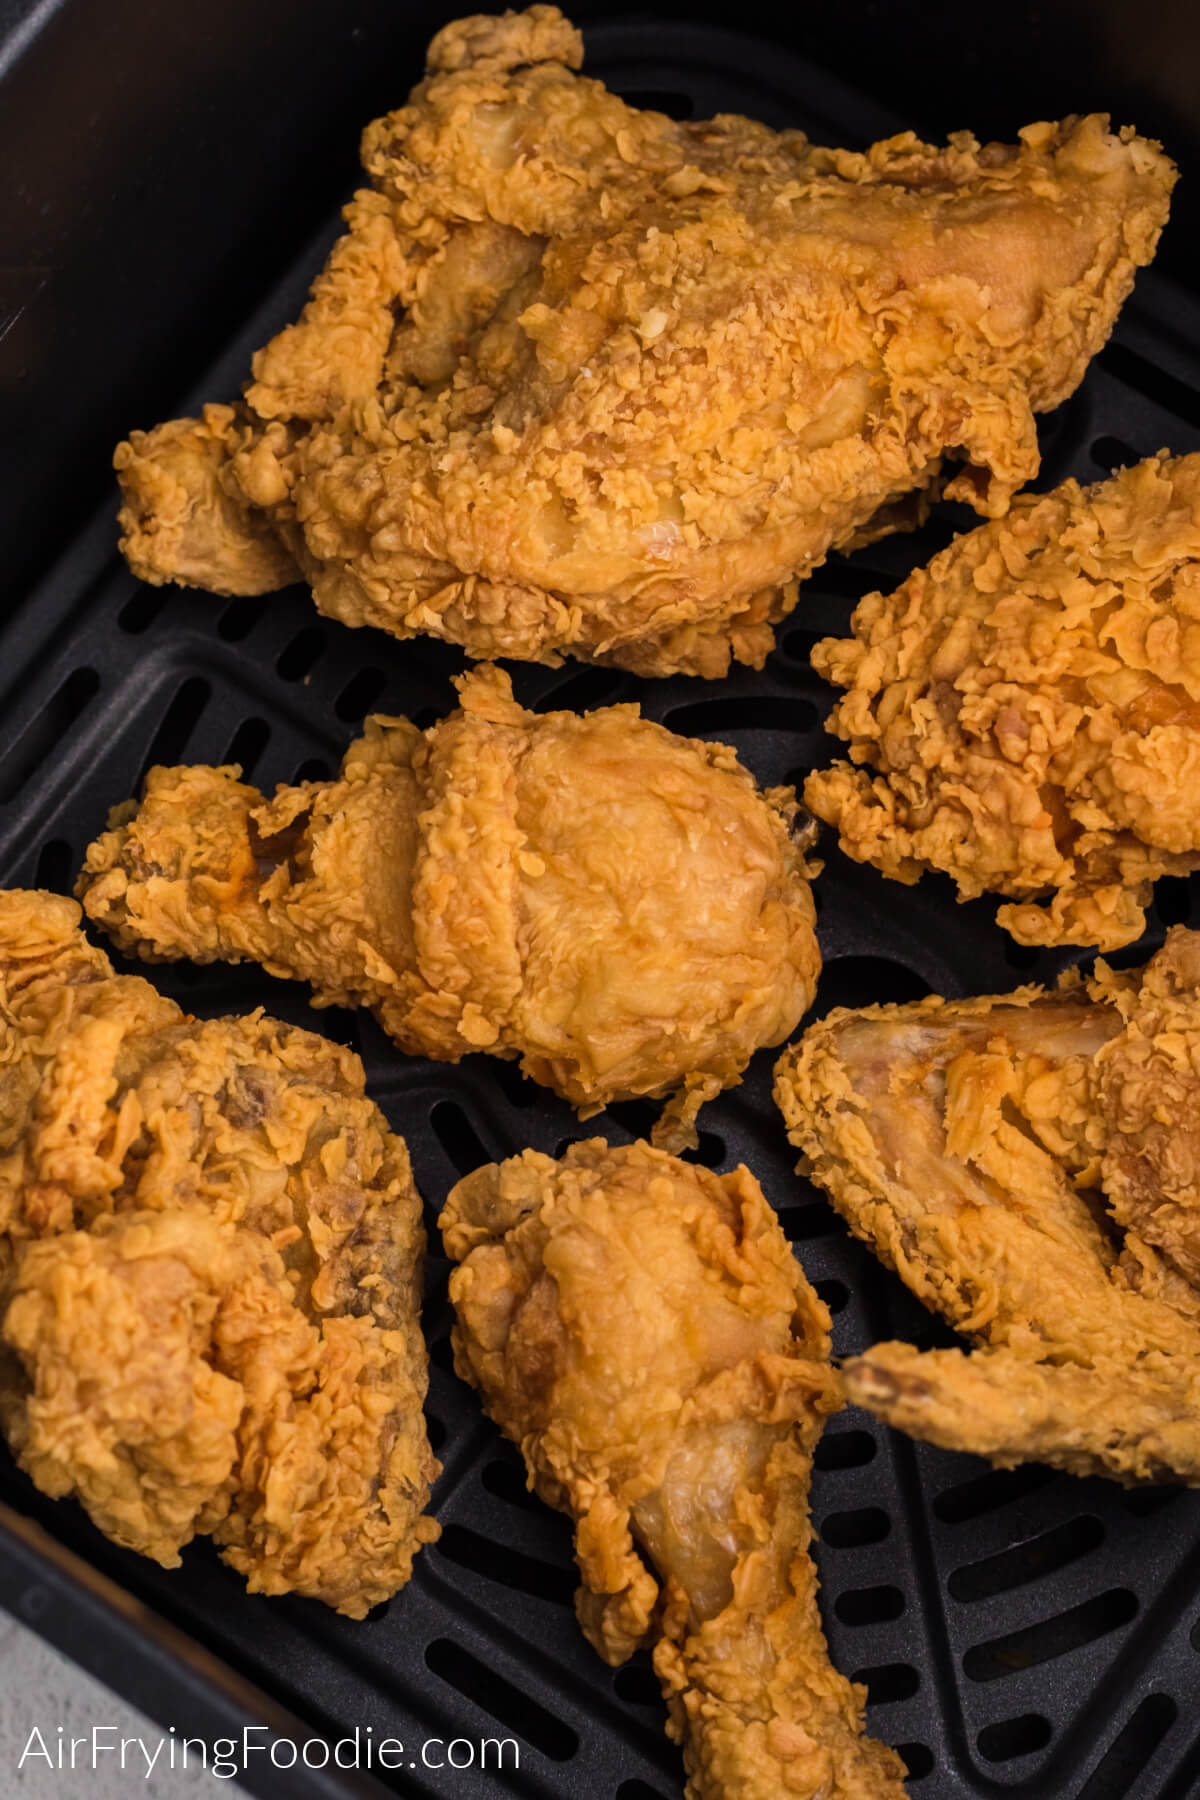 Close up photo of fried chicken in air fryer basket, ready to serve.